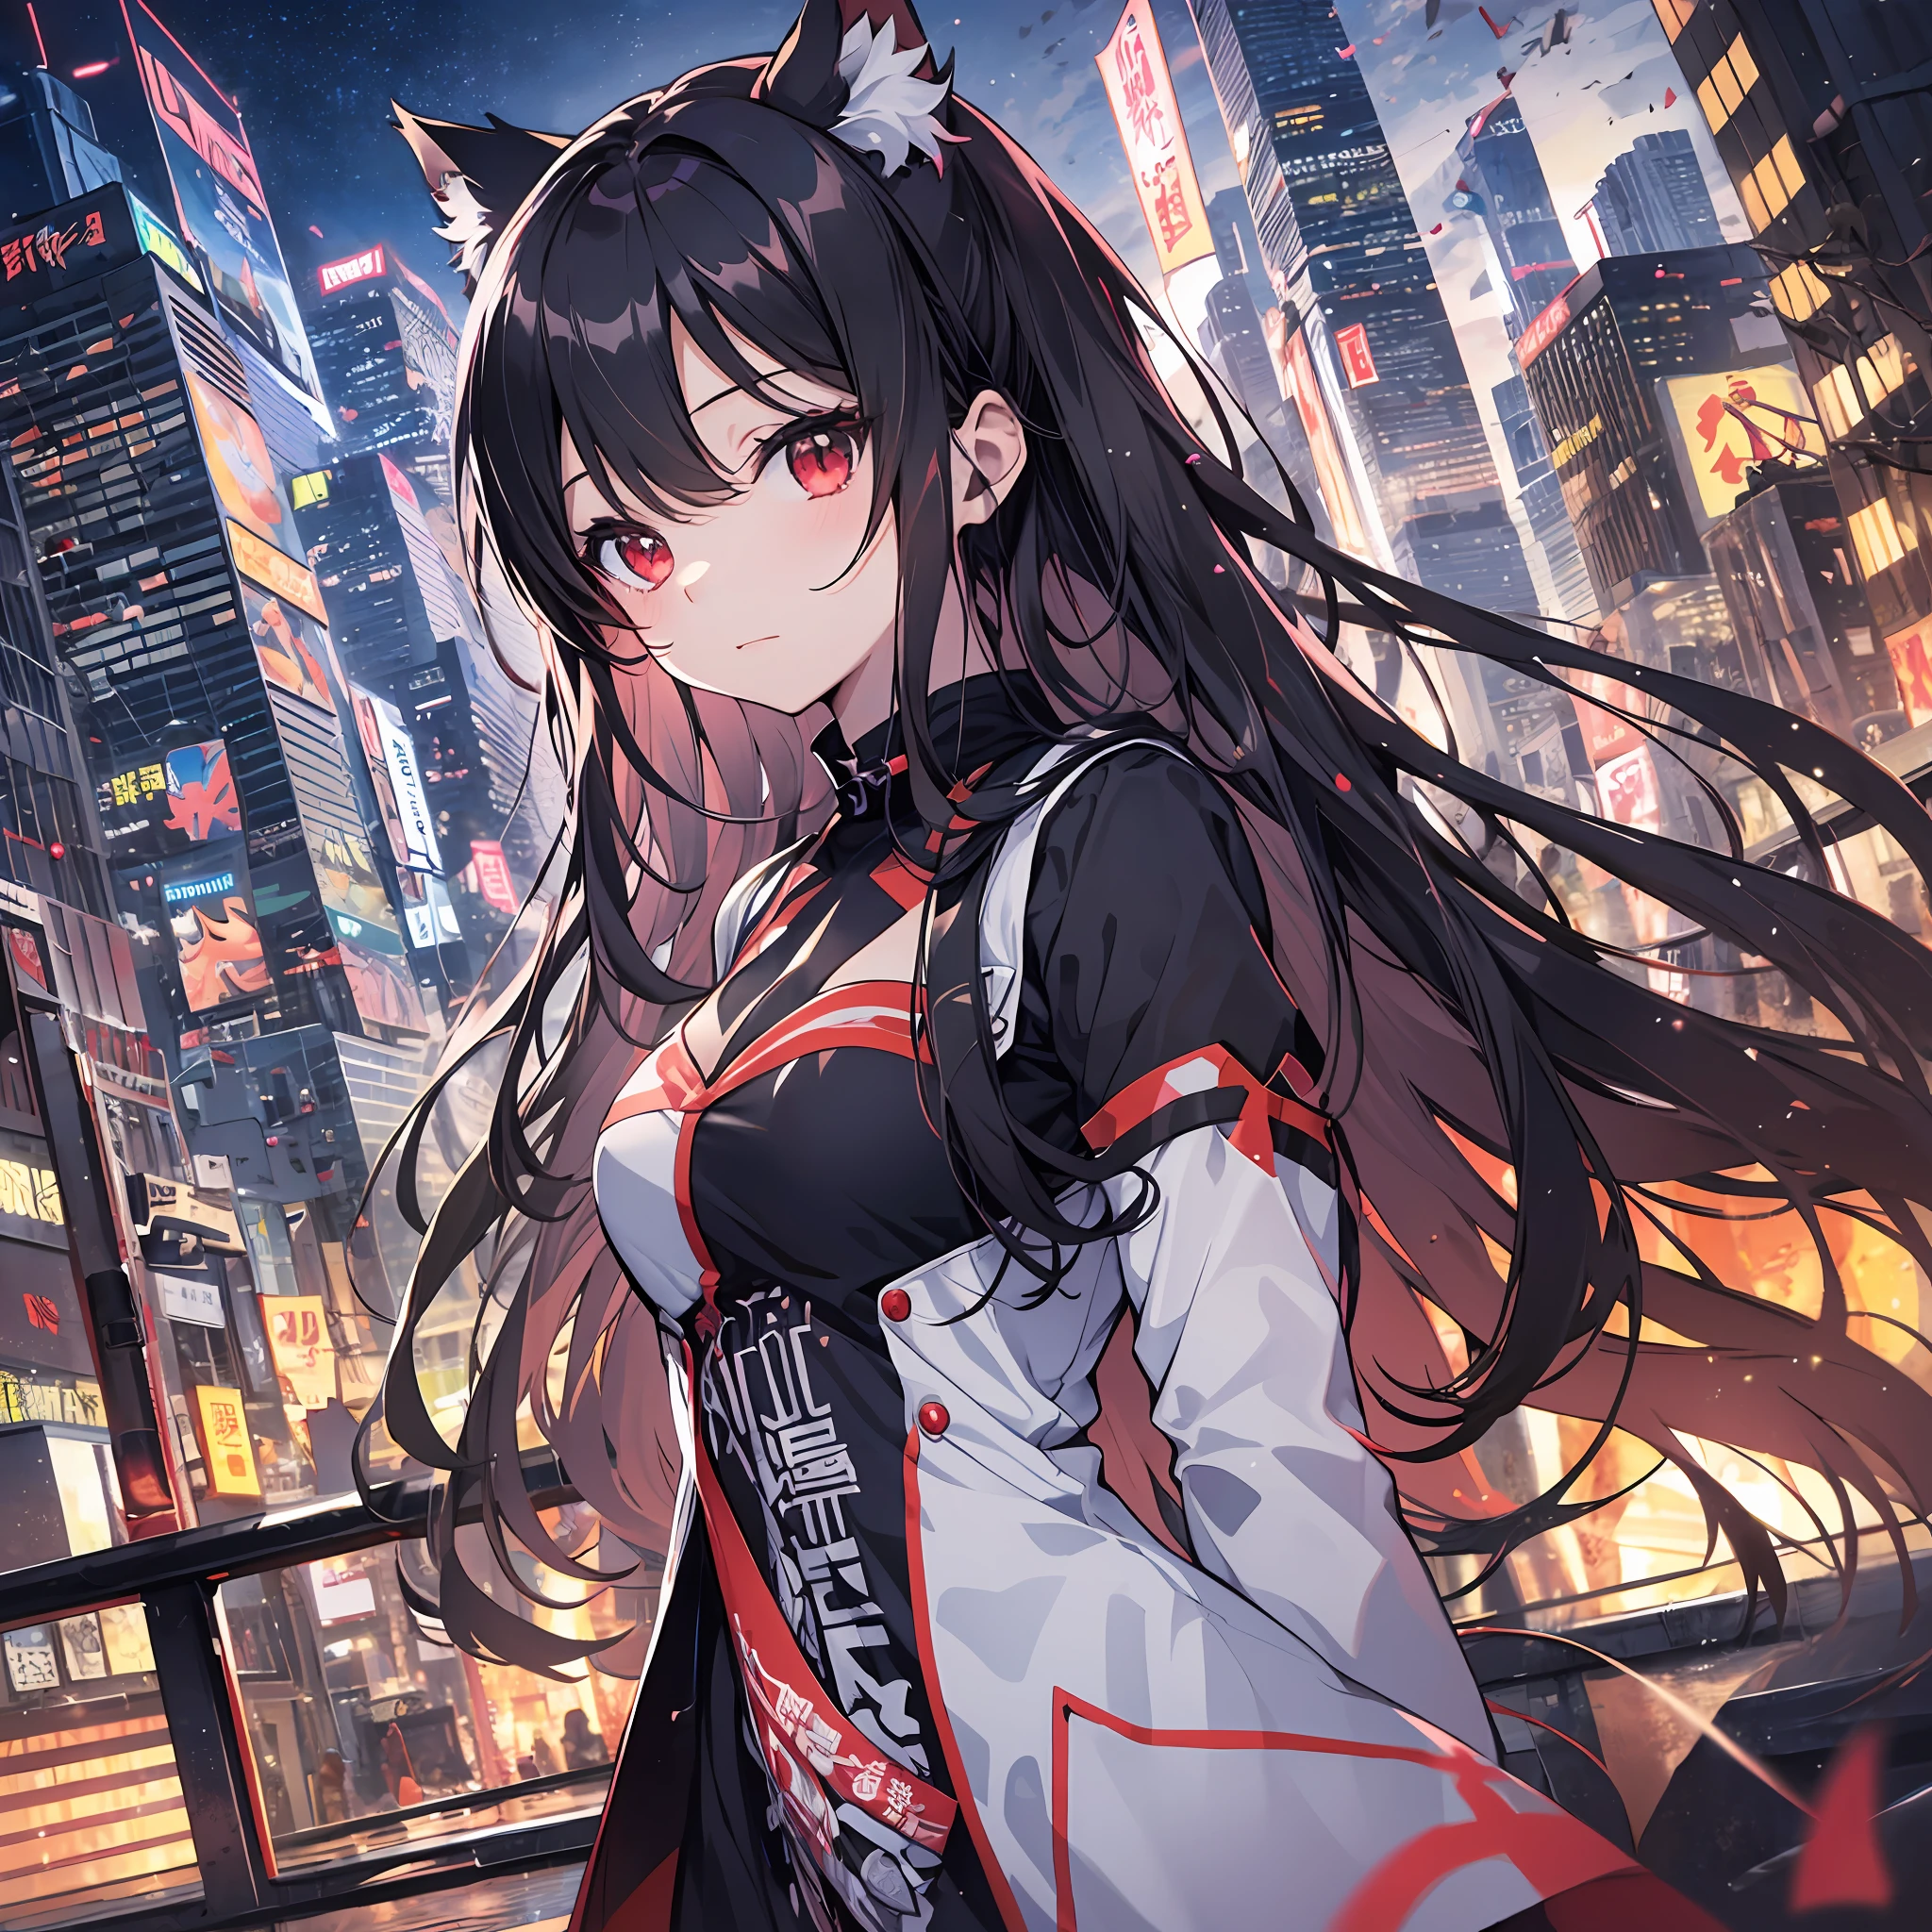 beste-Quality、8K))One woman　Anime girl with long black hair and cat ears、tohsaka-rin、anime moe art style、Fate/Anime style like Stay Night、long hair anime girl、extremely cute anime girl face、nightcore、From the front line of girls、Portrait of a cute anime girl、Anime girl with cat ears、High quality anime art style、 beautiful anime woman　　Night mood　Red eyes　Night Pool　swimsuiti　ful body